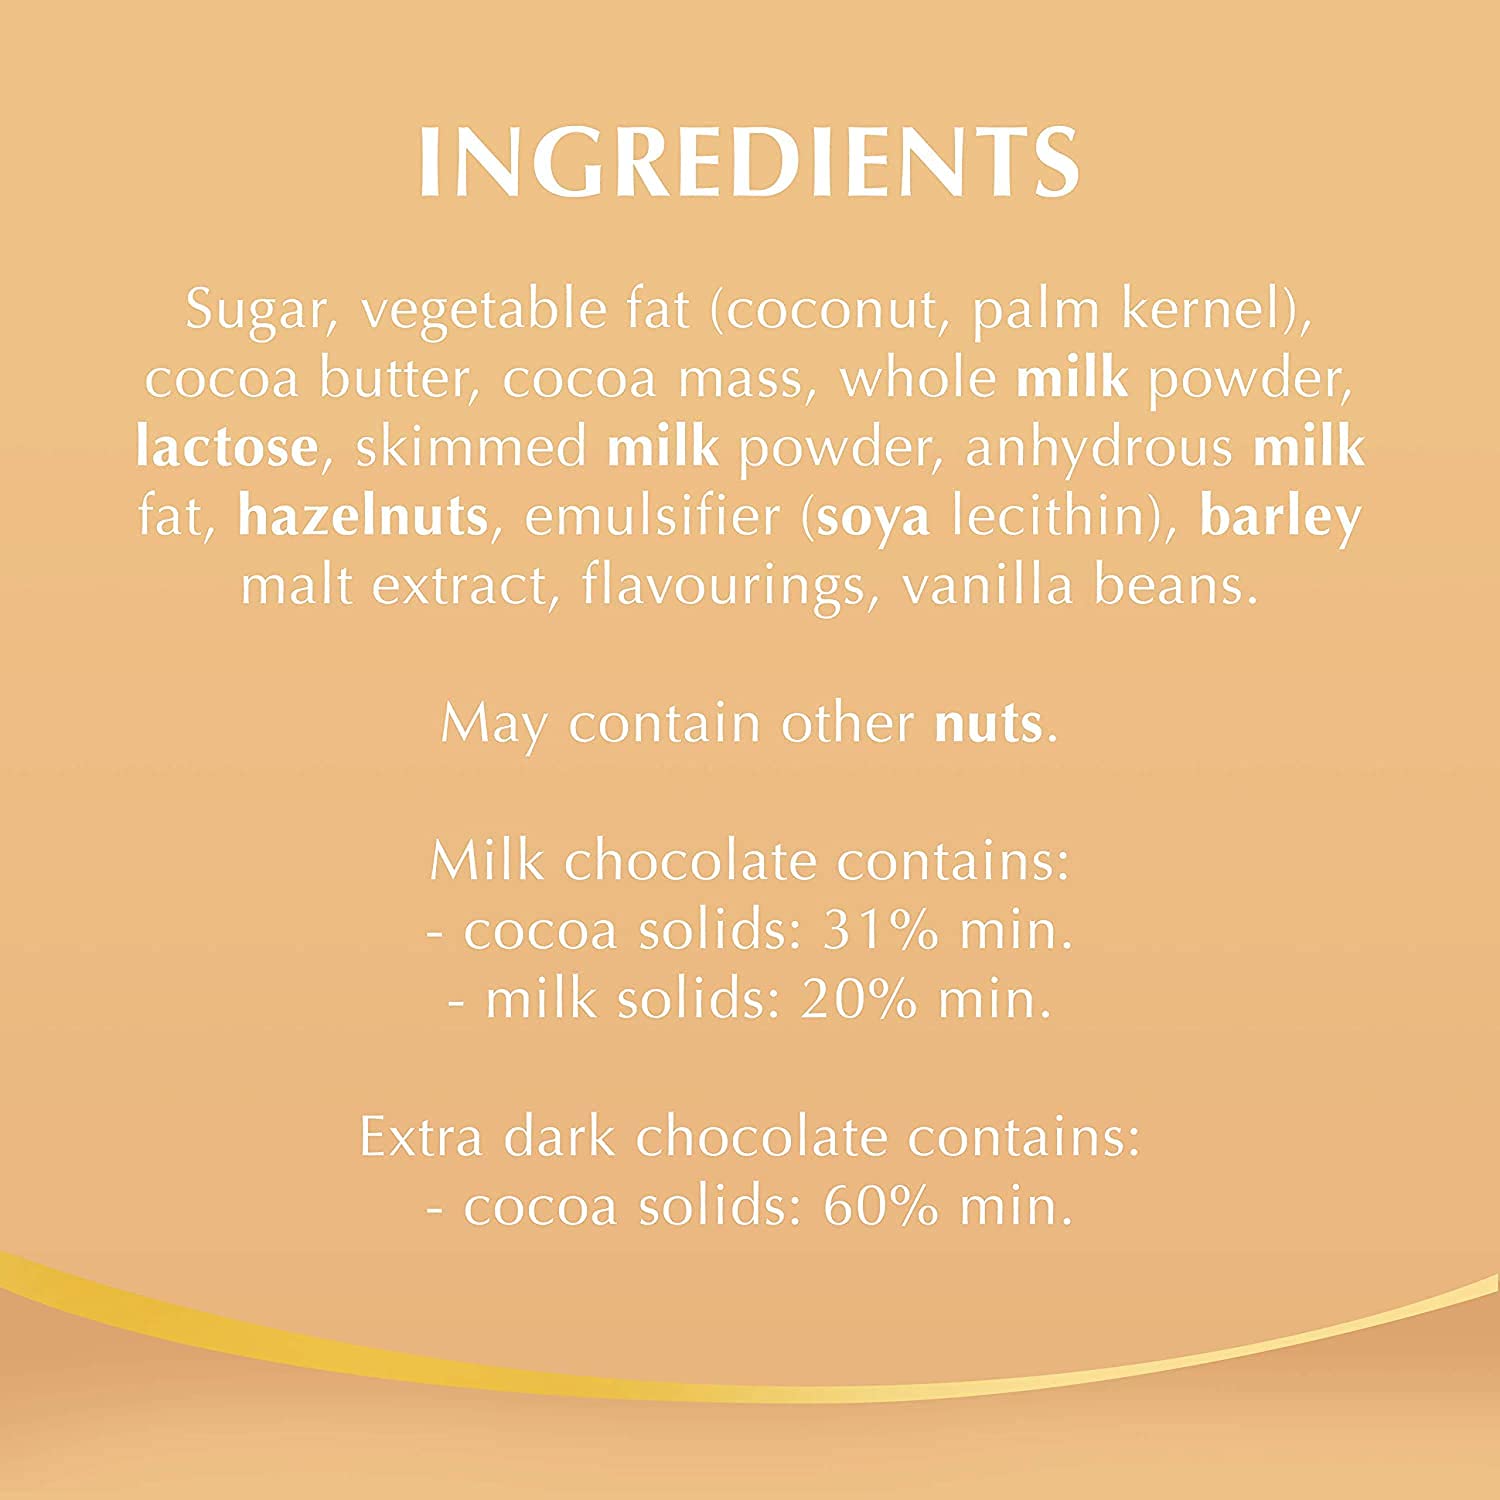 A timeless delicacy, the Lindt Lindor Assorted Cornet 200g contains a smooth moment of bliss, captured in a list of ingredients on a white background.